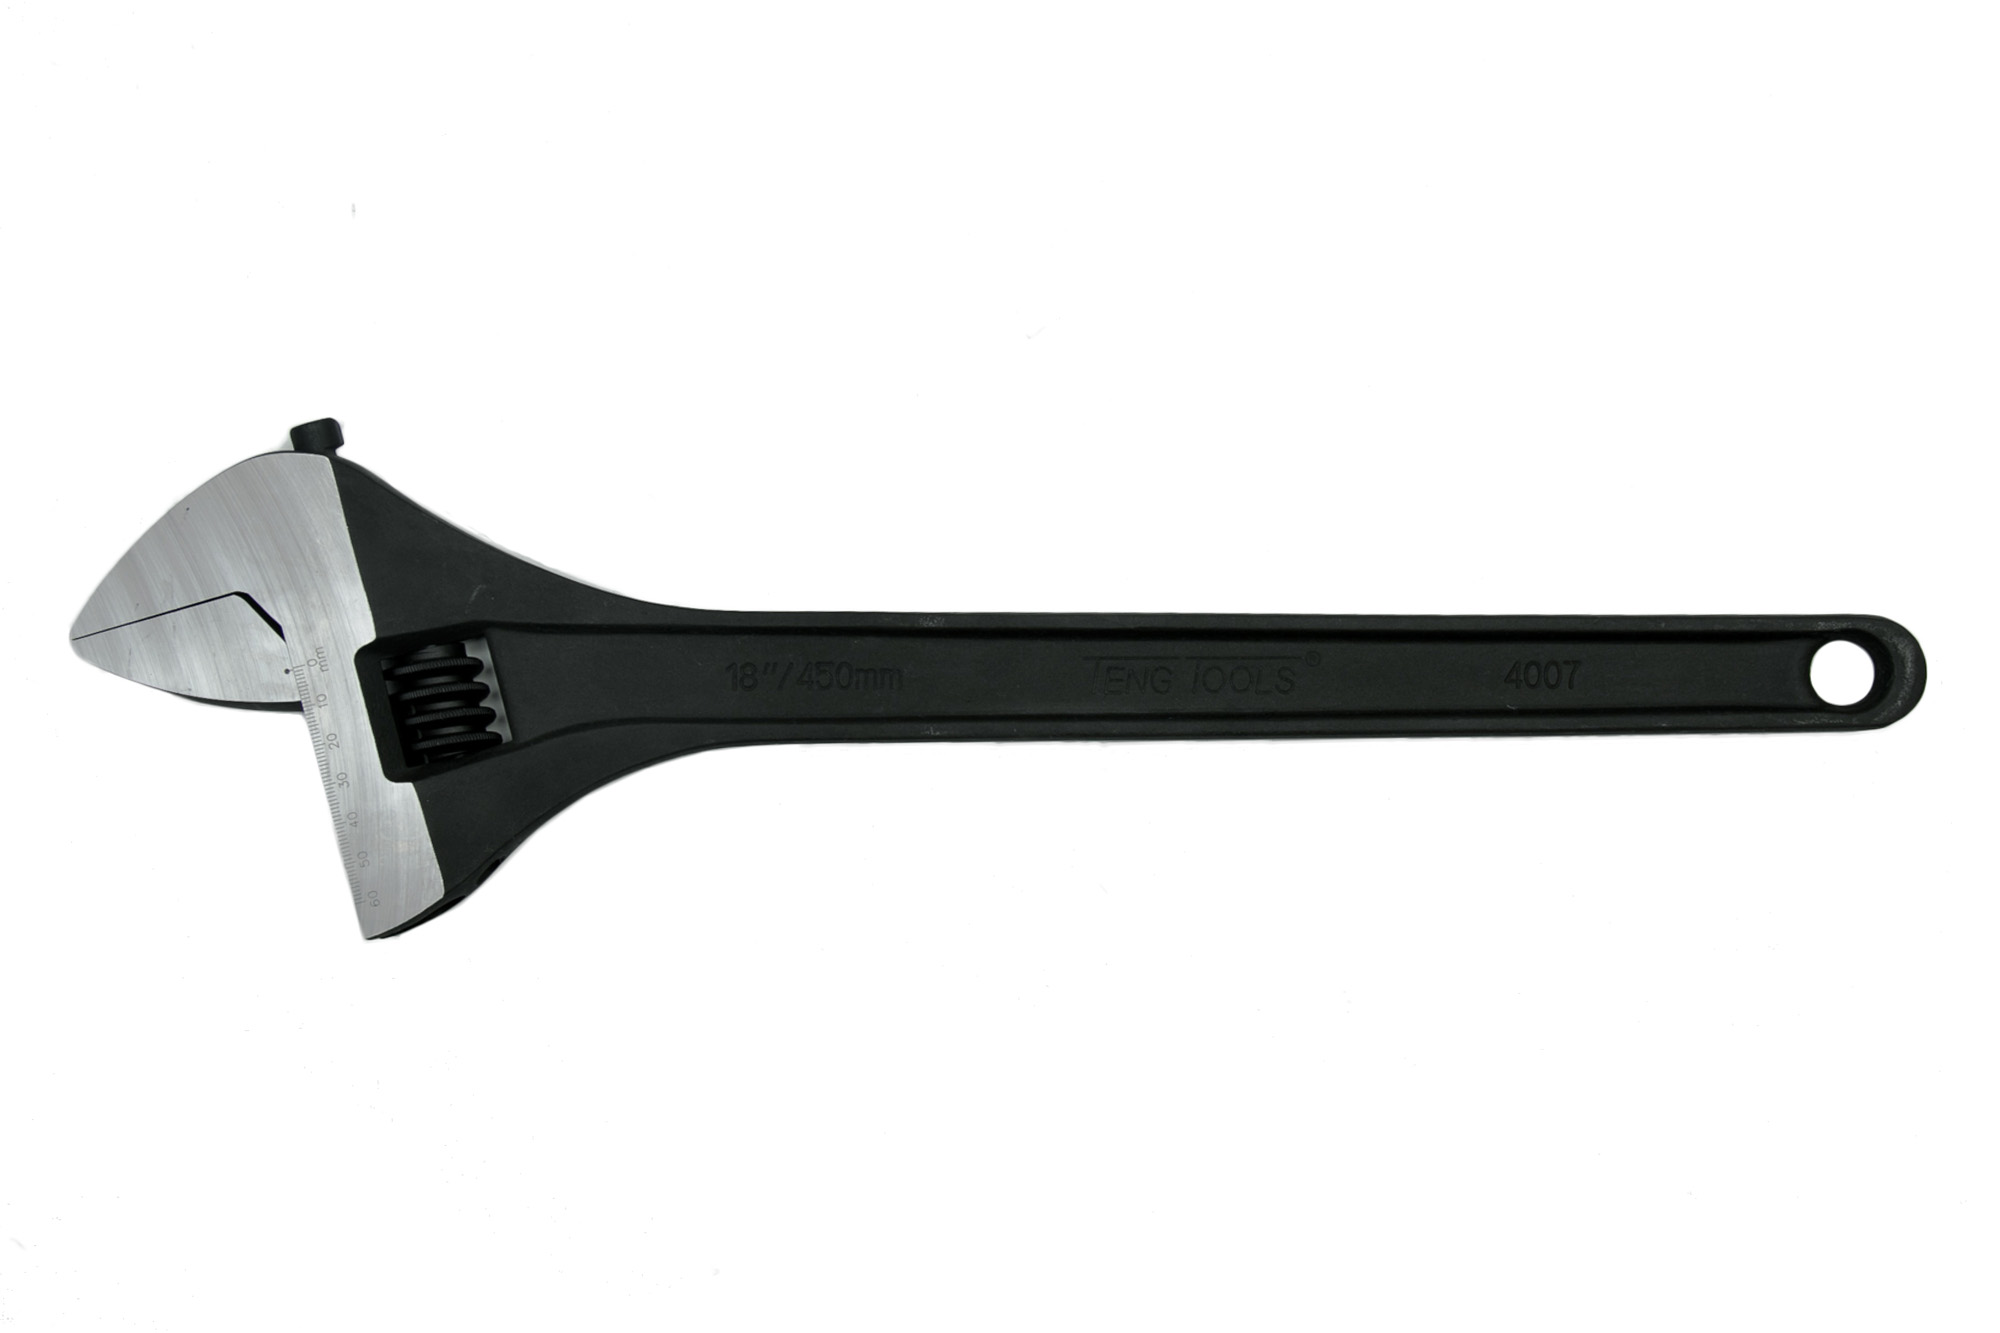 Teng Tools 18 Inch Adjustable Wrench - 4007